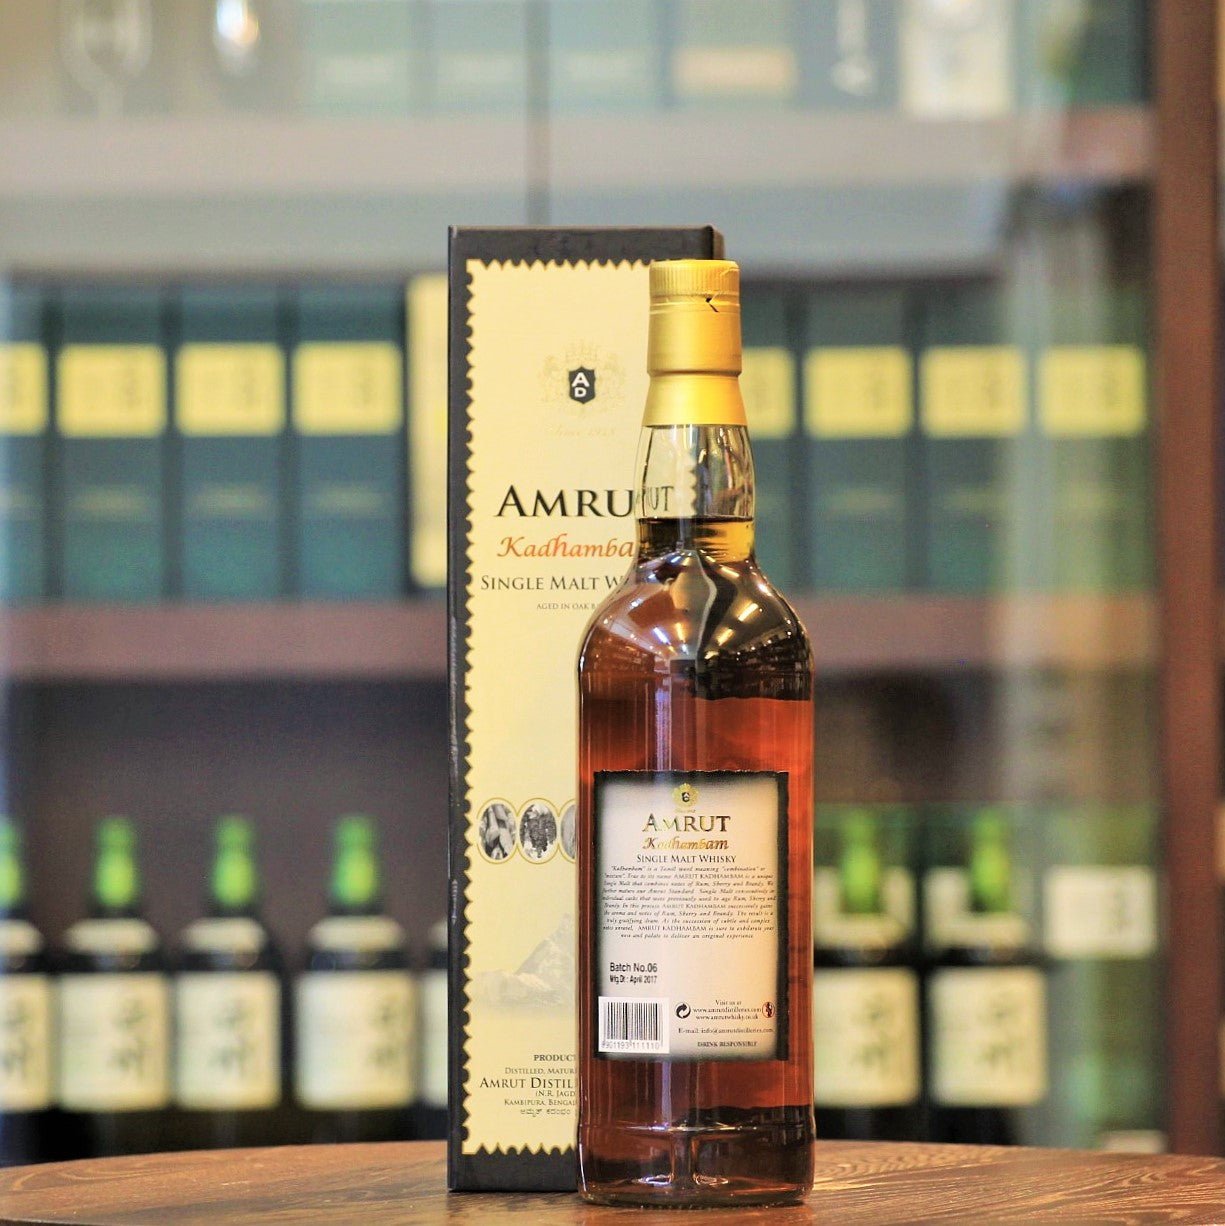 'Kadhambam' means "combination" or "mixture" in the Tamil language. Living up to its name, Amrut Kadhambam was matured in three different cask types - Rum, Sherry, and Brandy, which gives it the aroma and notes of these three barrels. Nose: Rich and floral, honeyed, nutty, new oak, vanilla, tropical fruity aromas Palate: Candied fruits, subtle oak with a light dusting of peat and integrated spice Finish: Warm and complex with a dry and long finish (Tasting Notes from the distillery). 